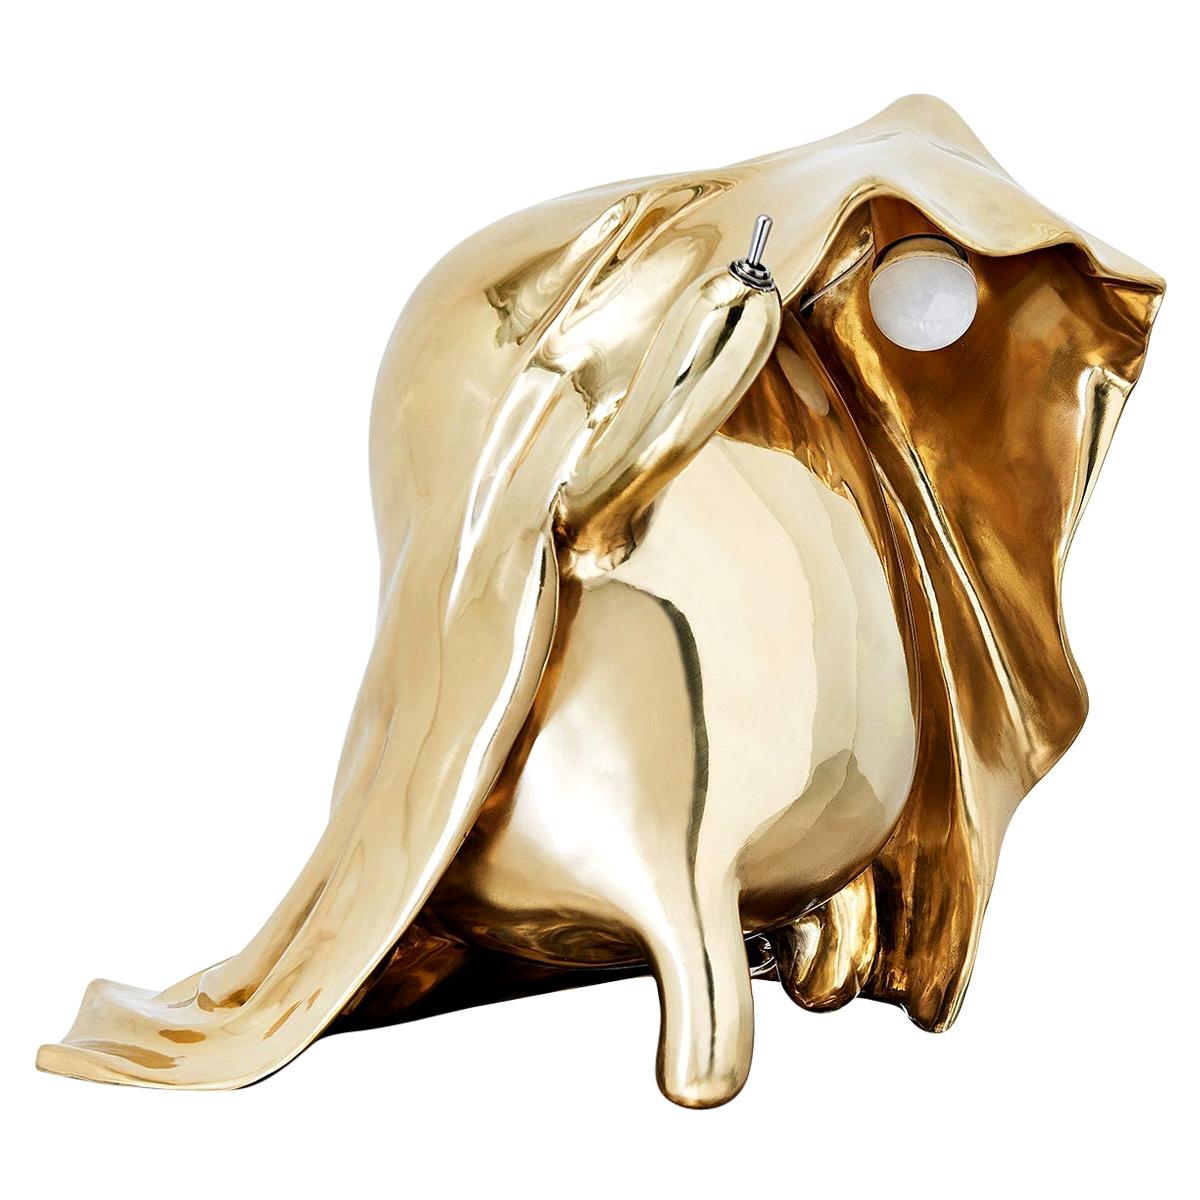 "Hide and Seek" Figurative Table Lamp Polished Brass by Zhipeng Tan For Sale